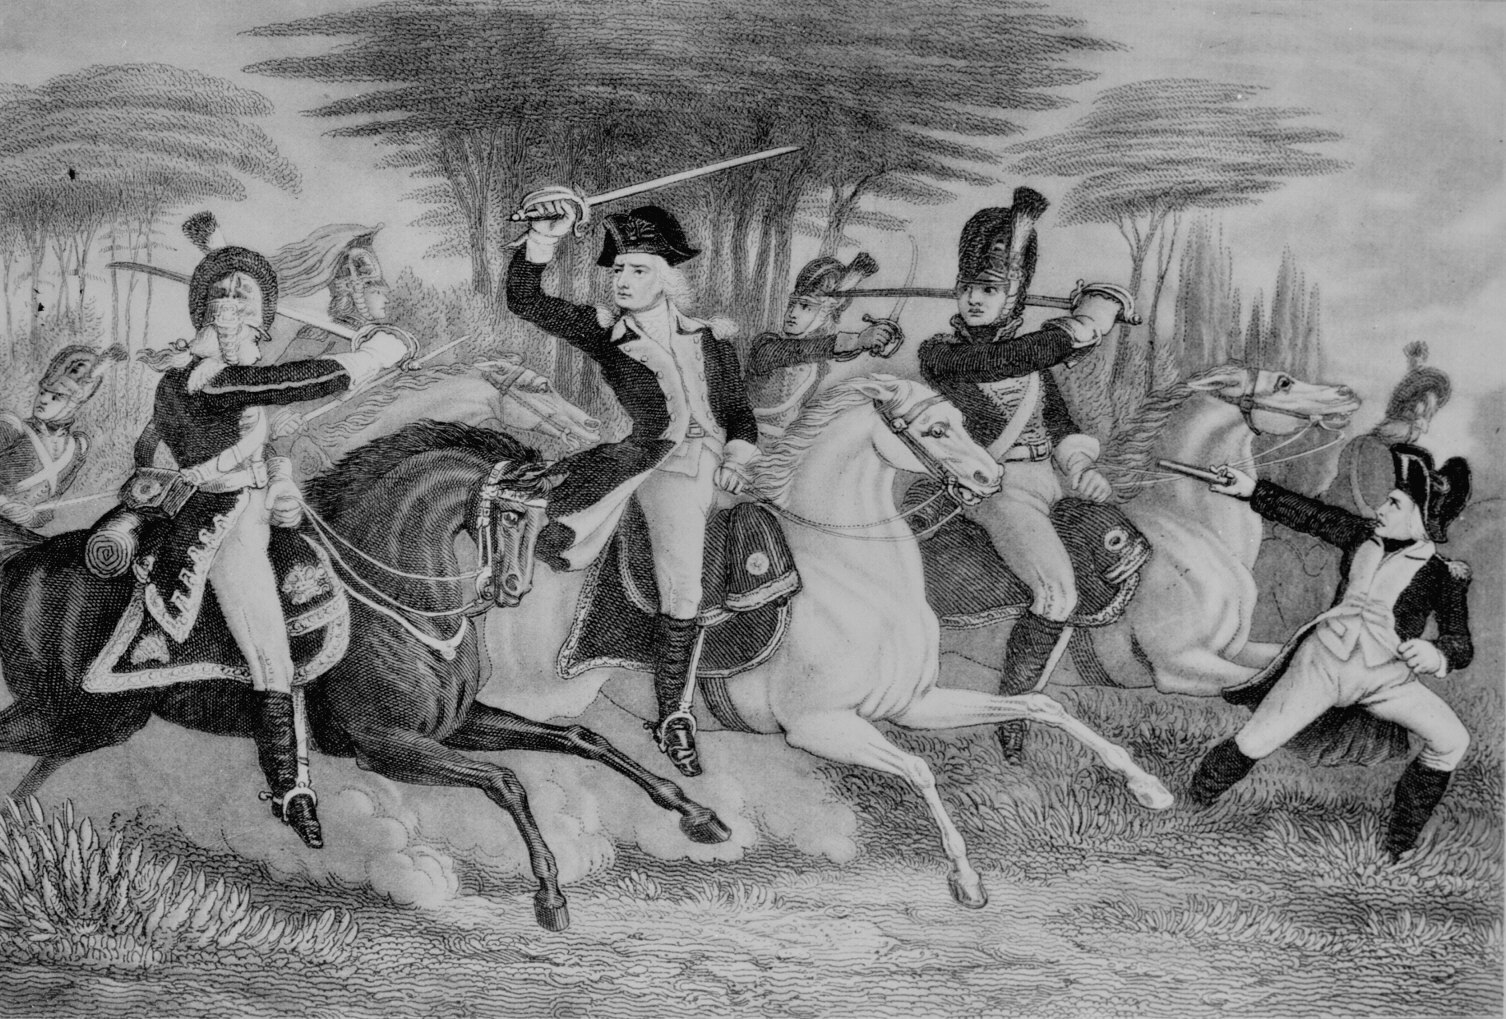 William Washington at the Battle of Cowpens